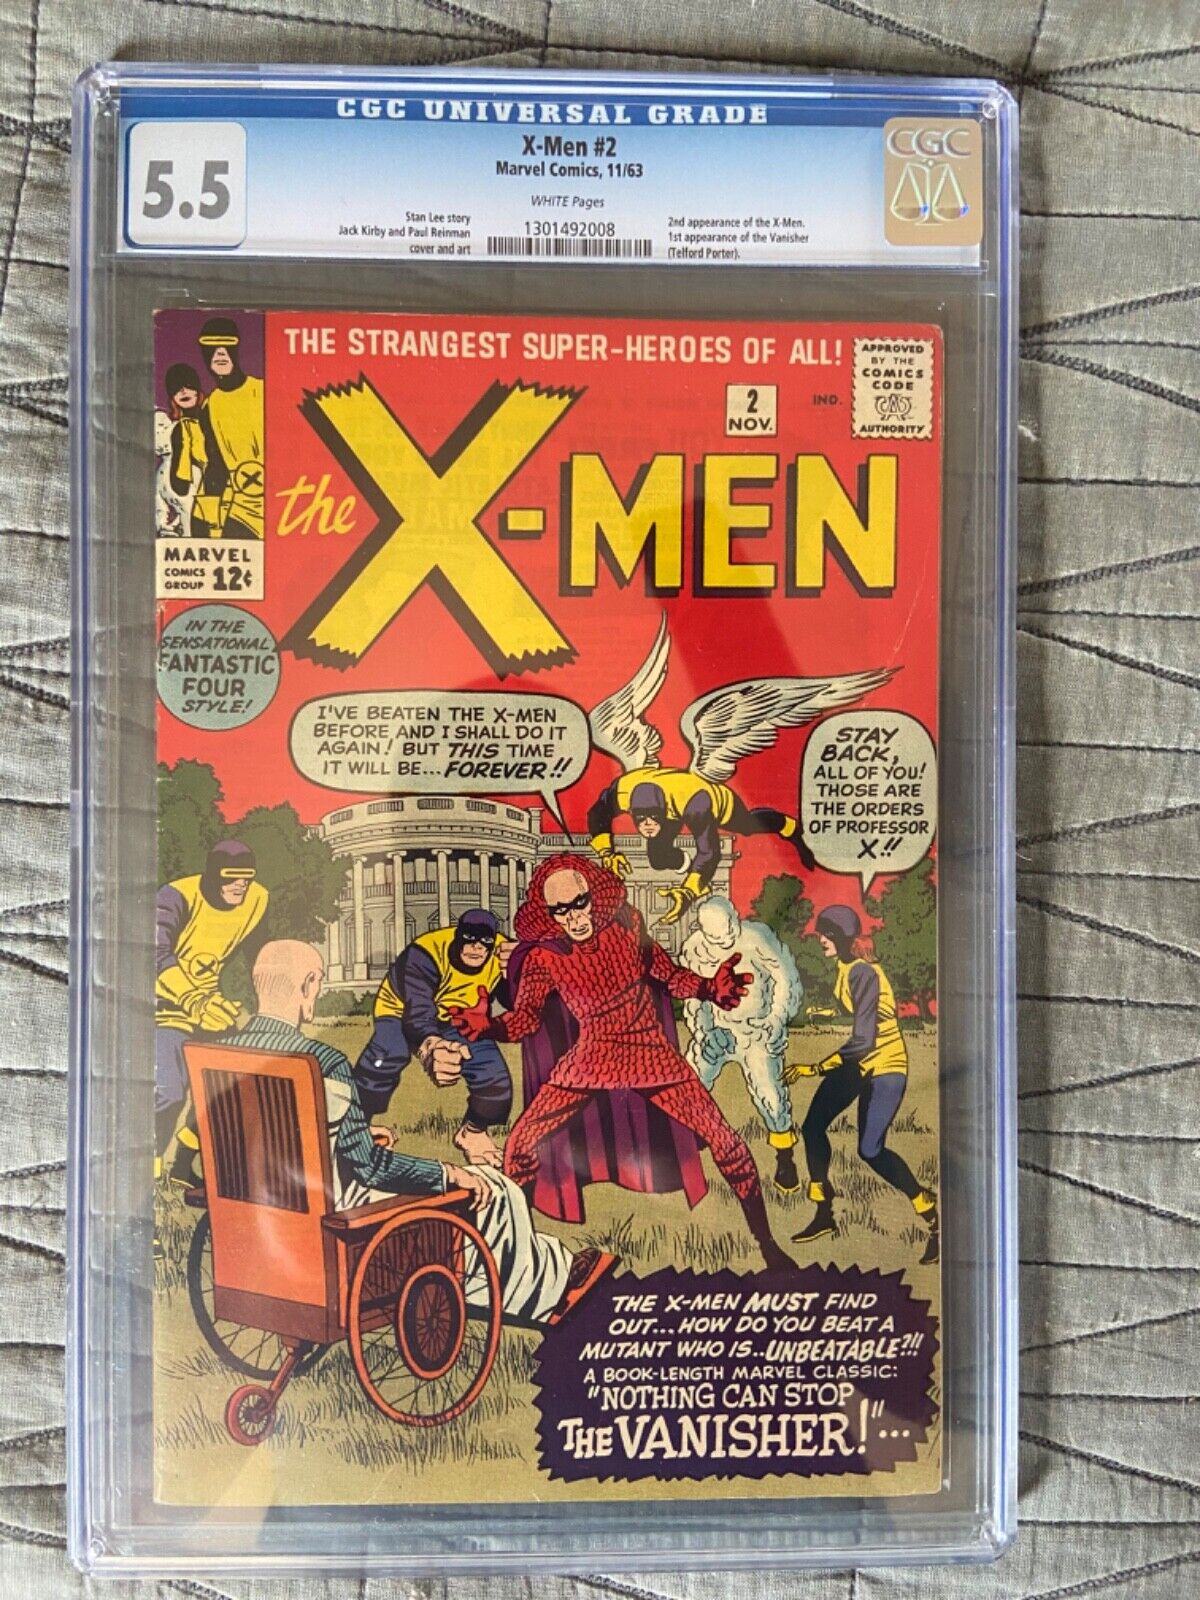 RARE 1963 SILVER AGE XMEN 2 CGC 55 UNIVERSAL KEY ISSUE WHITE PAGES